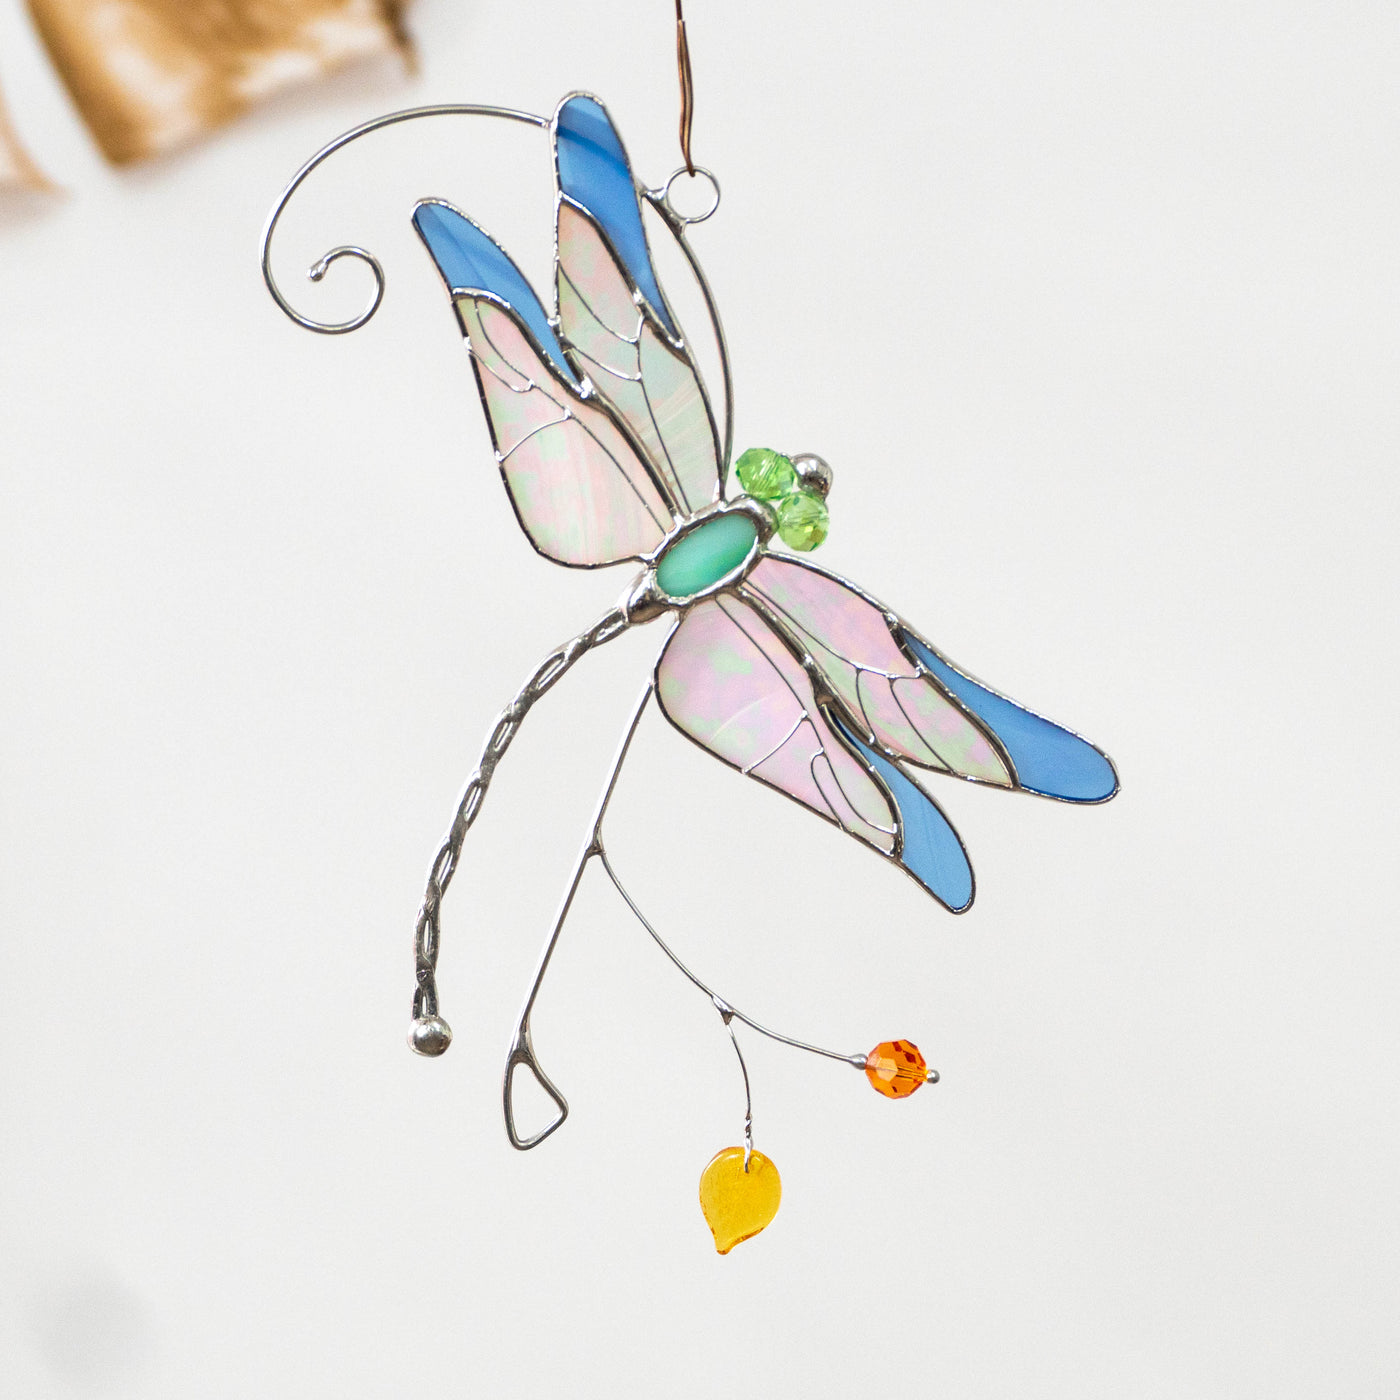 Stained glass blue iridescent-winged dragonfly sitting on the branch window hanging